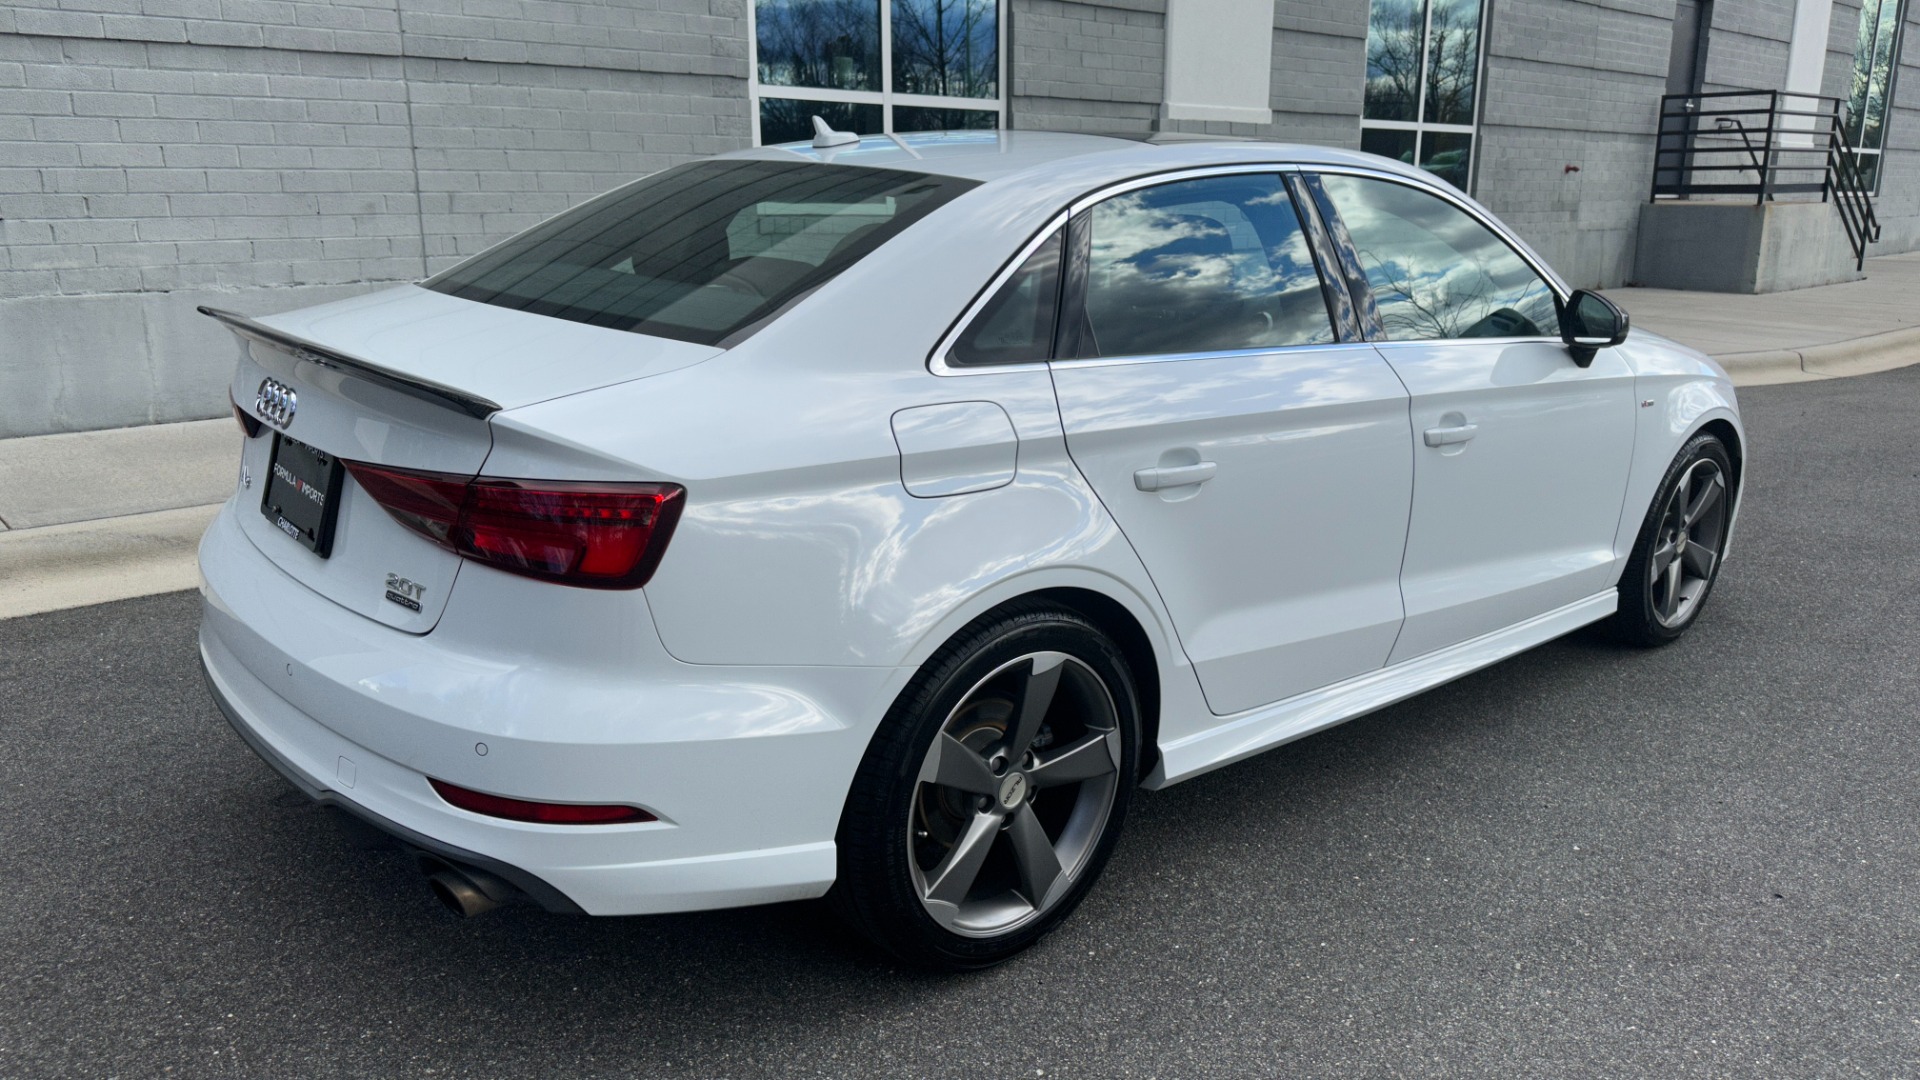 Used 2017 Audi A3 Sedan PREMIUM PLUS / SPORT PACKAGE / LIGHT PACKAGE / SPORT SUSPENSION / B&O SOUND for sale $21,995 at Formula Imports in Charlotte NC 28227 8